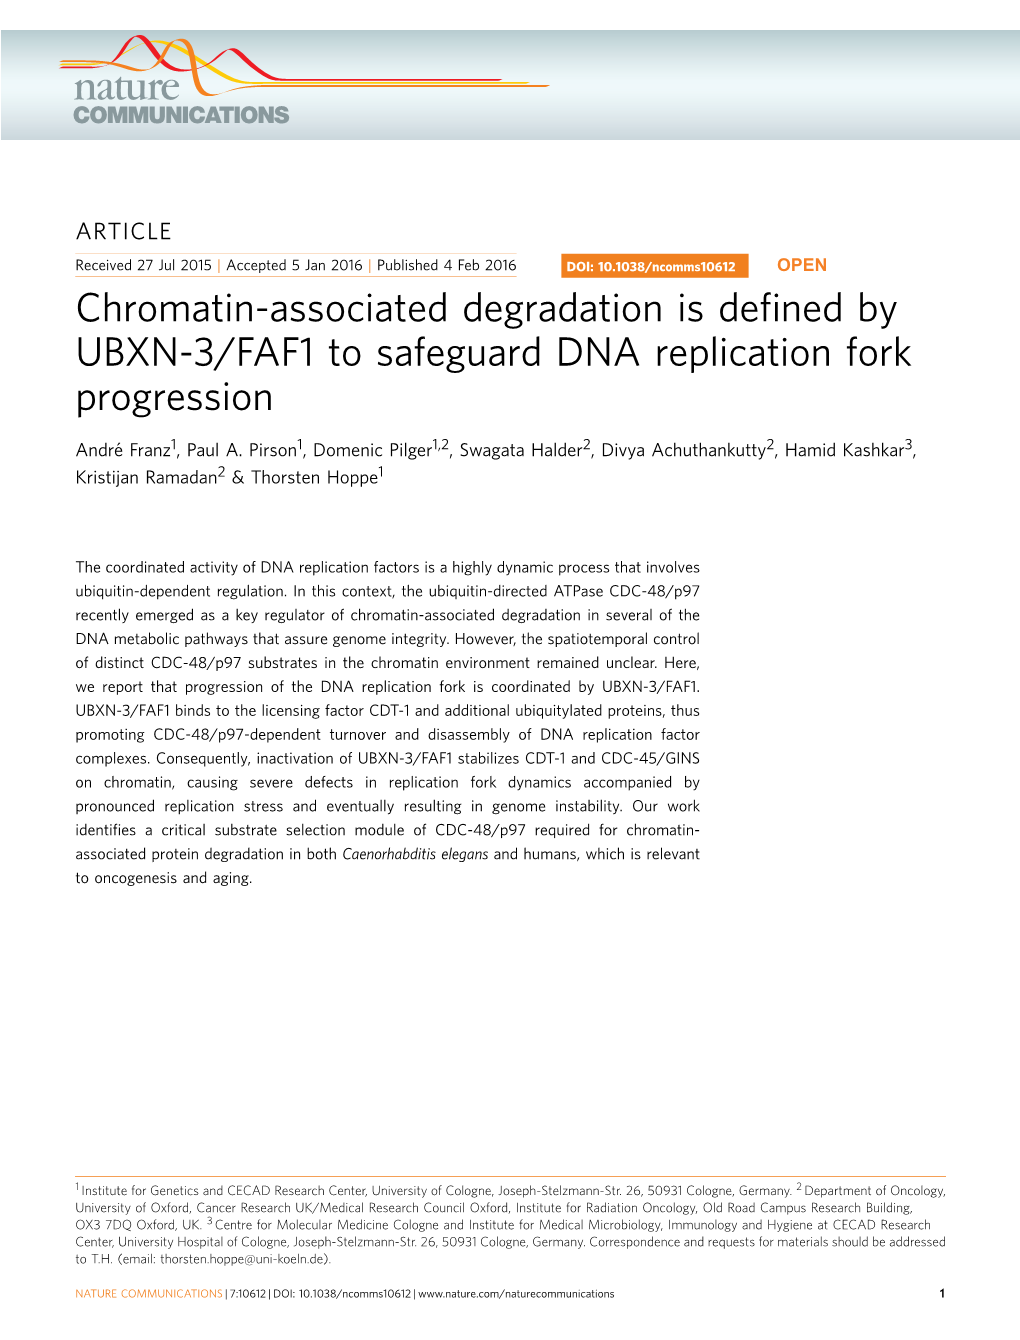 Chromatin-Associated Degradation Is Defined by UBXN-3/FAF1 To